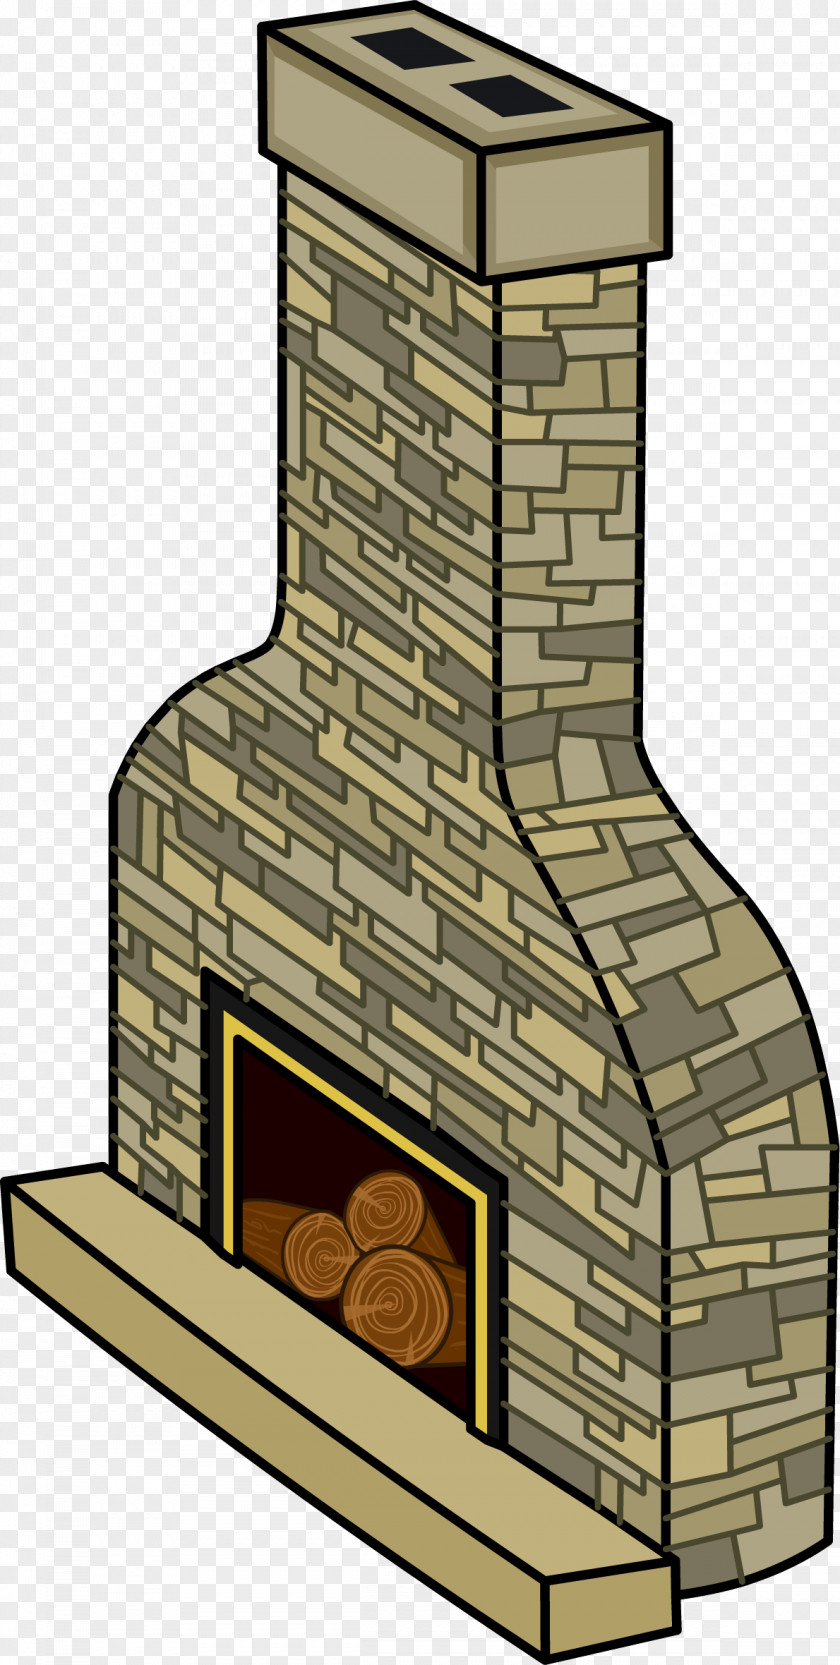 Fireplace Items Hearth Image Clip Art PNG